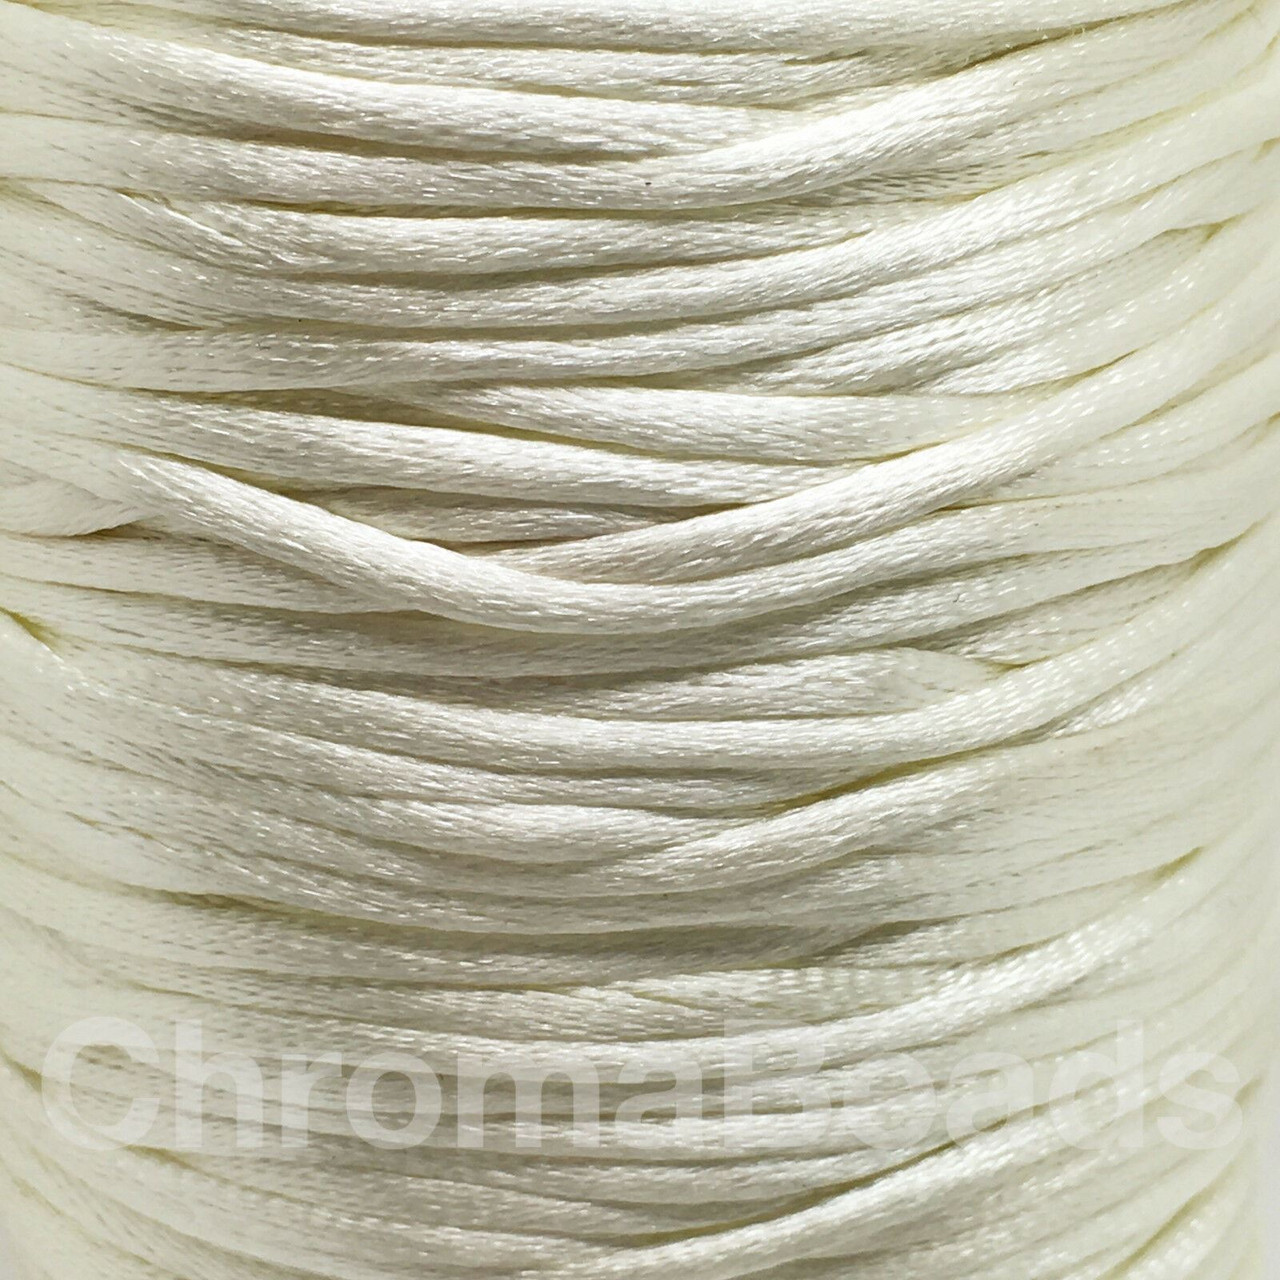 2x Reels of Nylon Cord (Rattail) - Ivory, approx 45m each